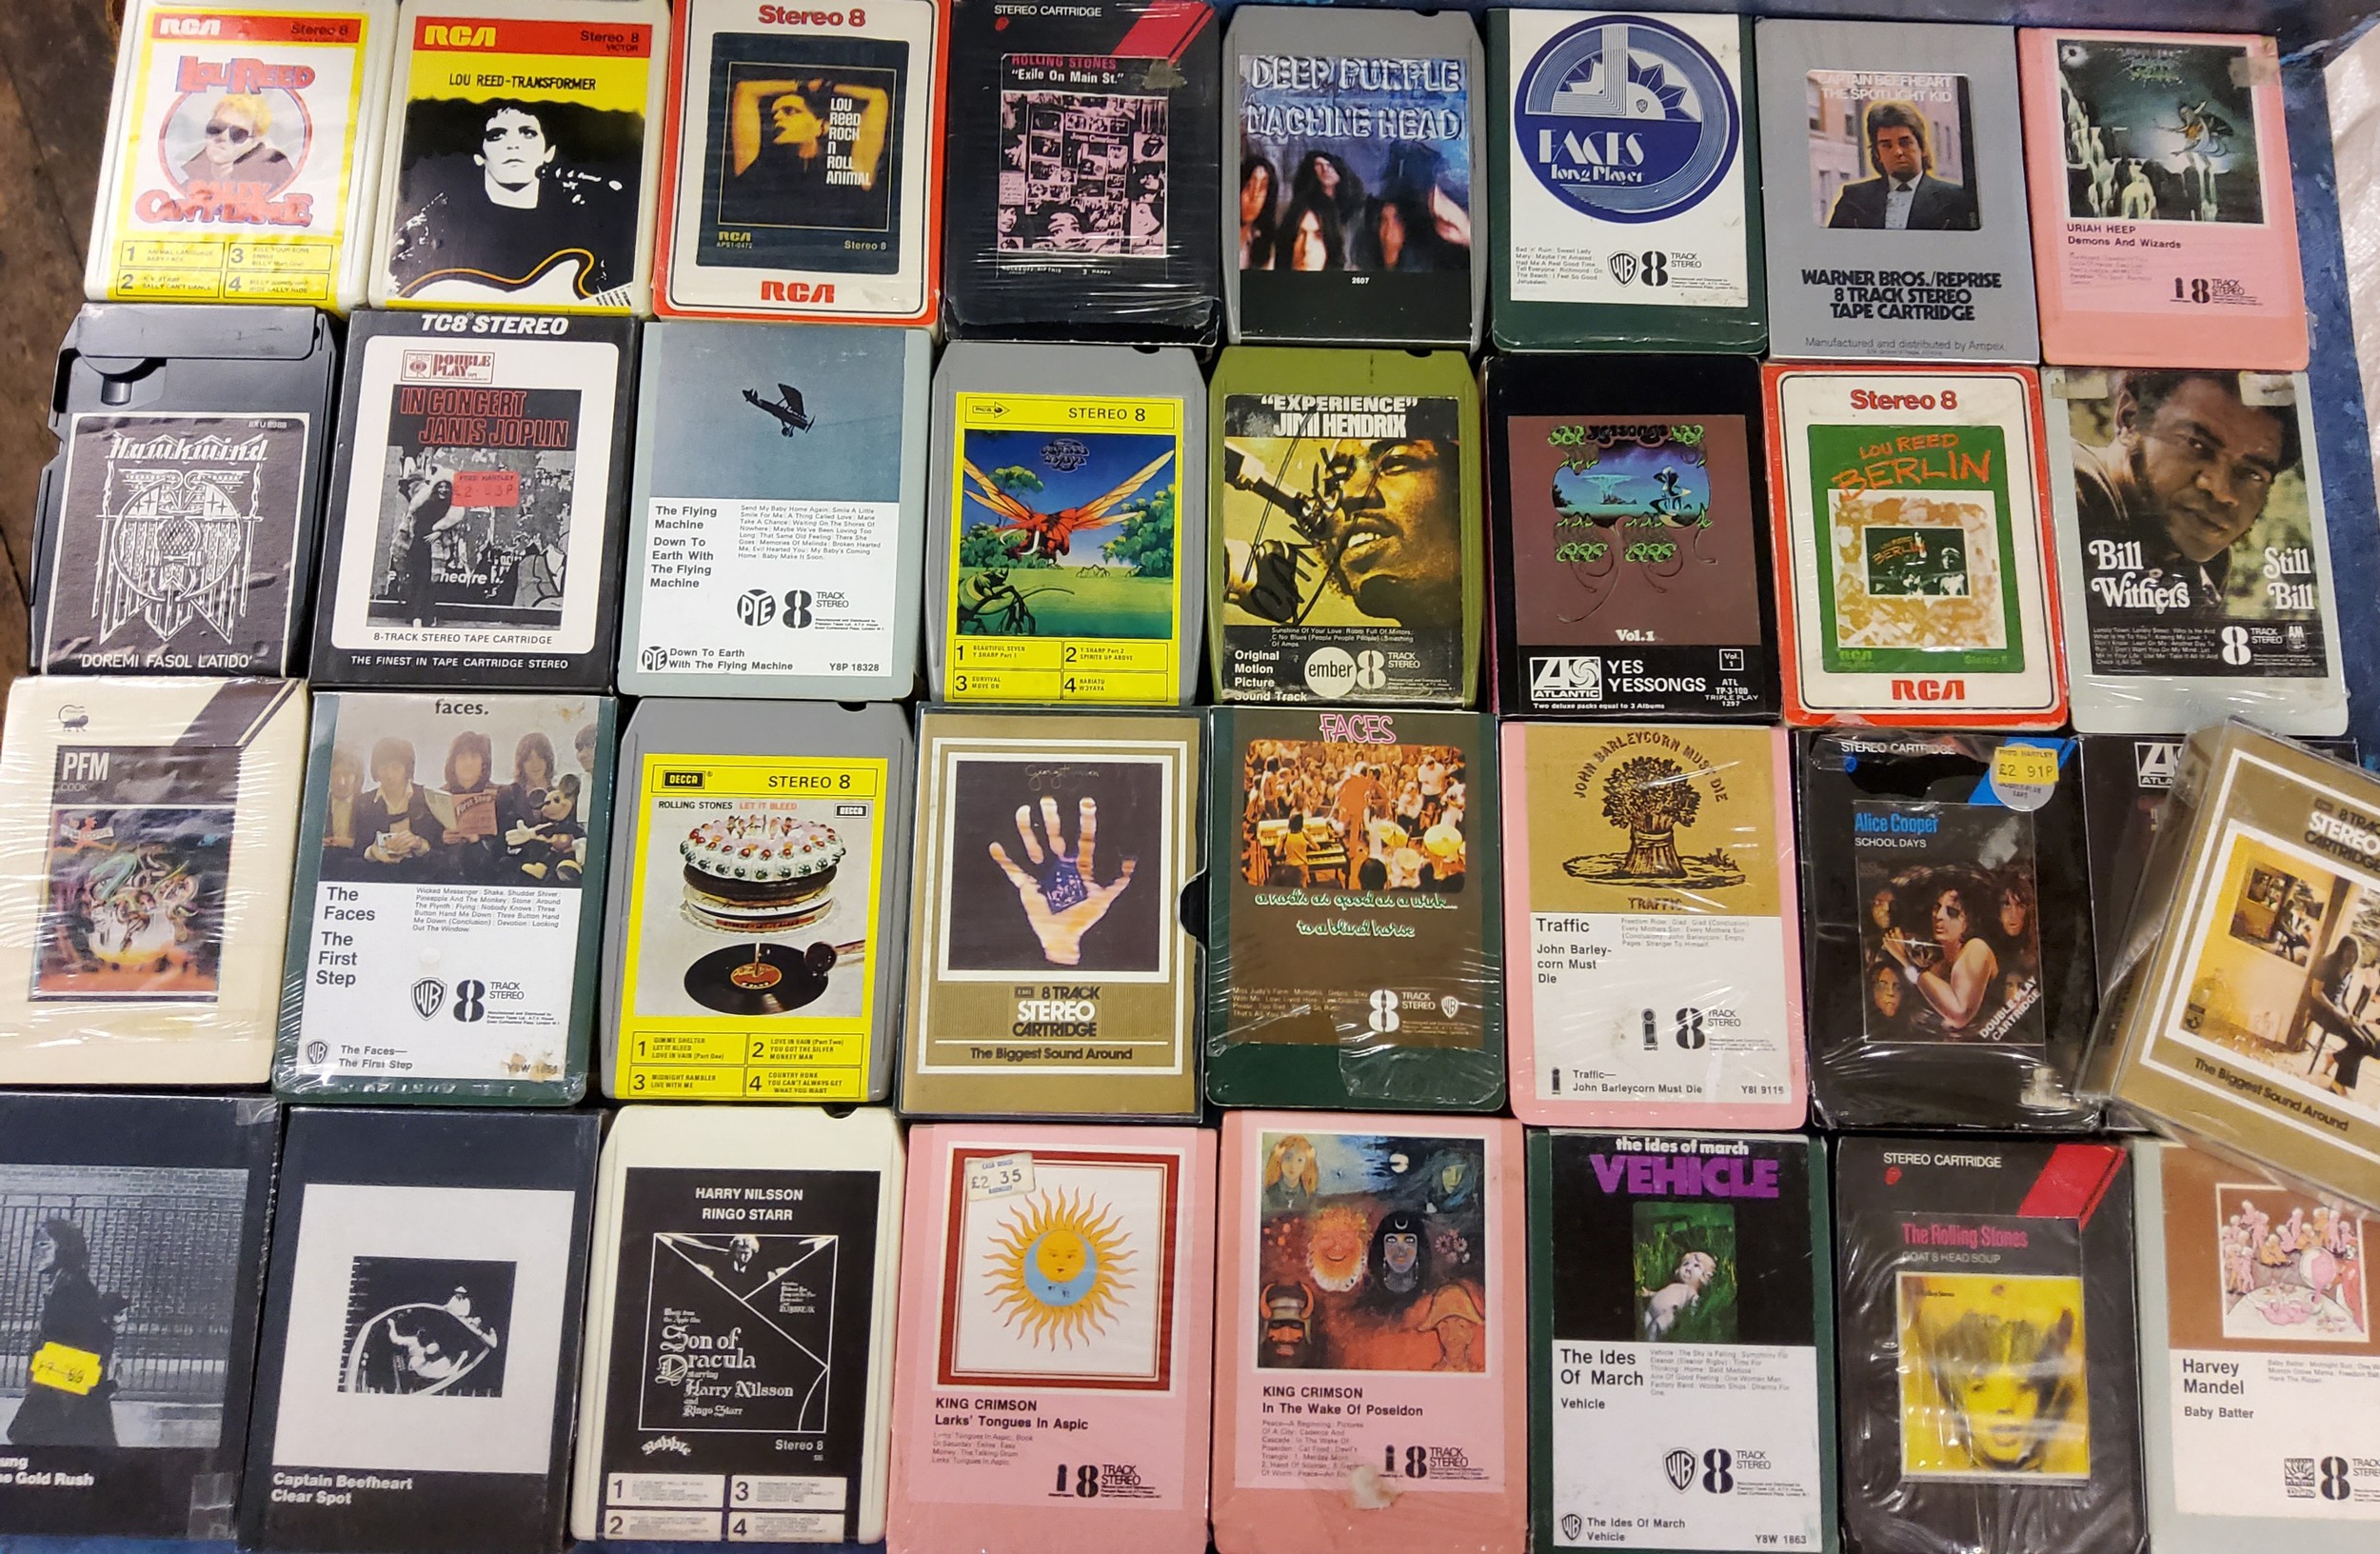 8 Track Stereo Cassettes - Harvey Mandel, Baby Batter;  The Rolling Stones Goats Head Soup, Let it